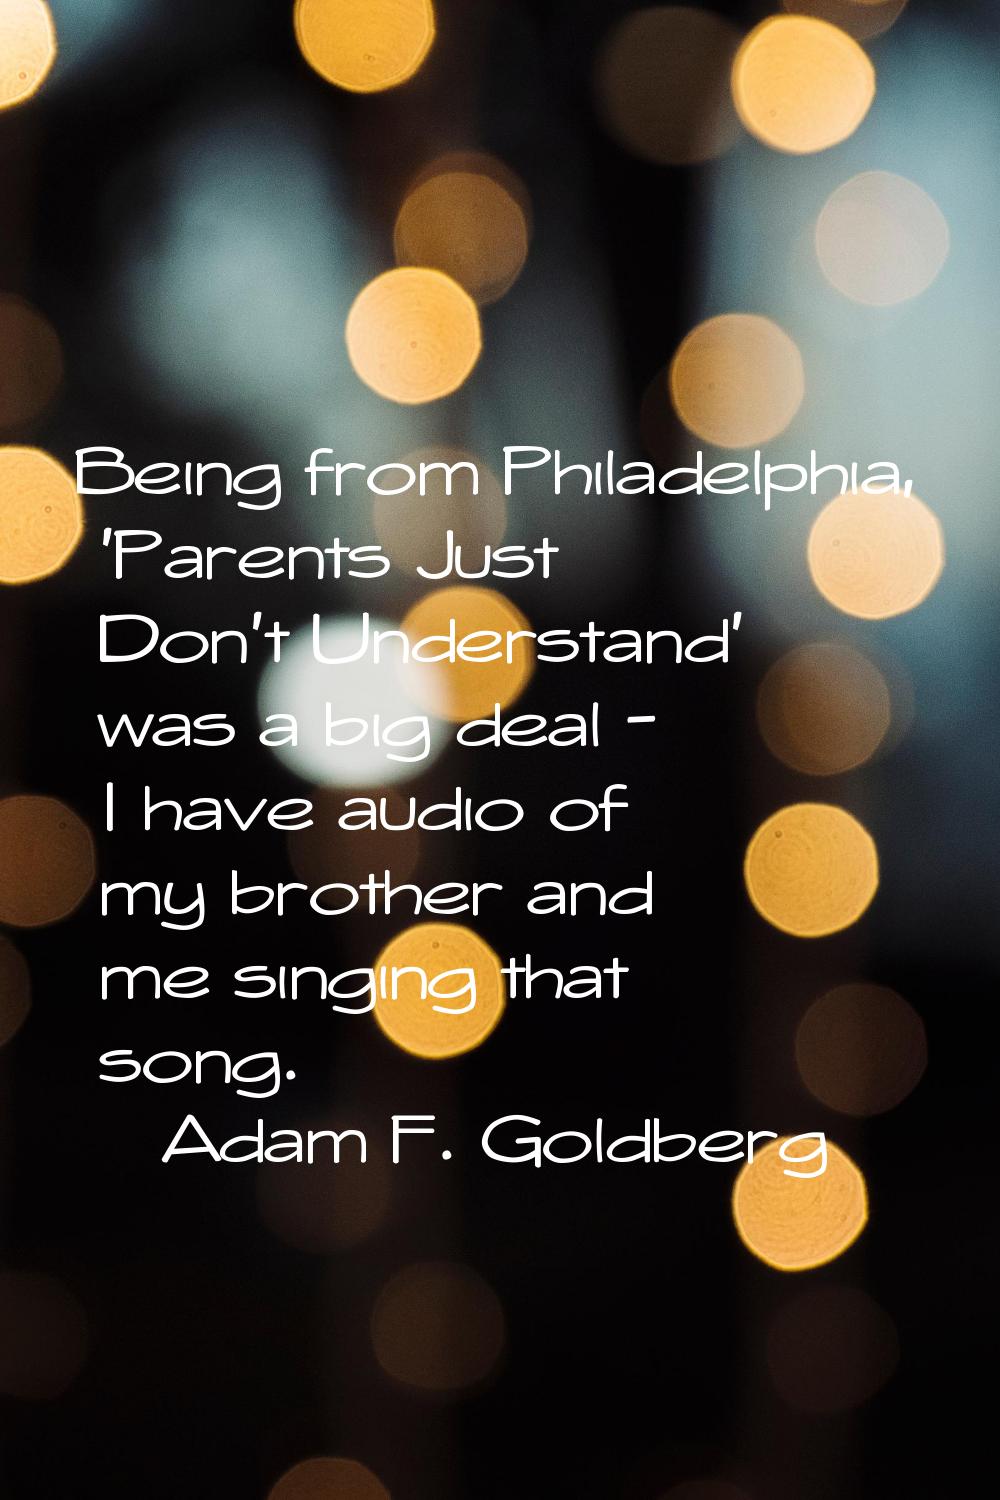 Being from Philadelphia, 'Parents Just Don't Understand' was a big deal - I have audio of my brothe